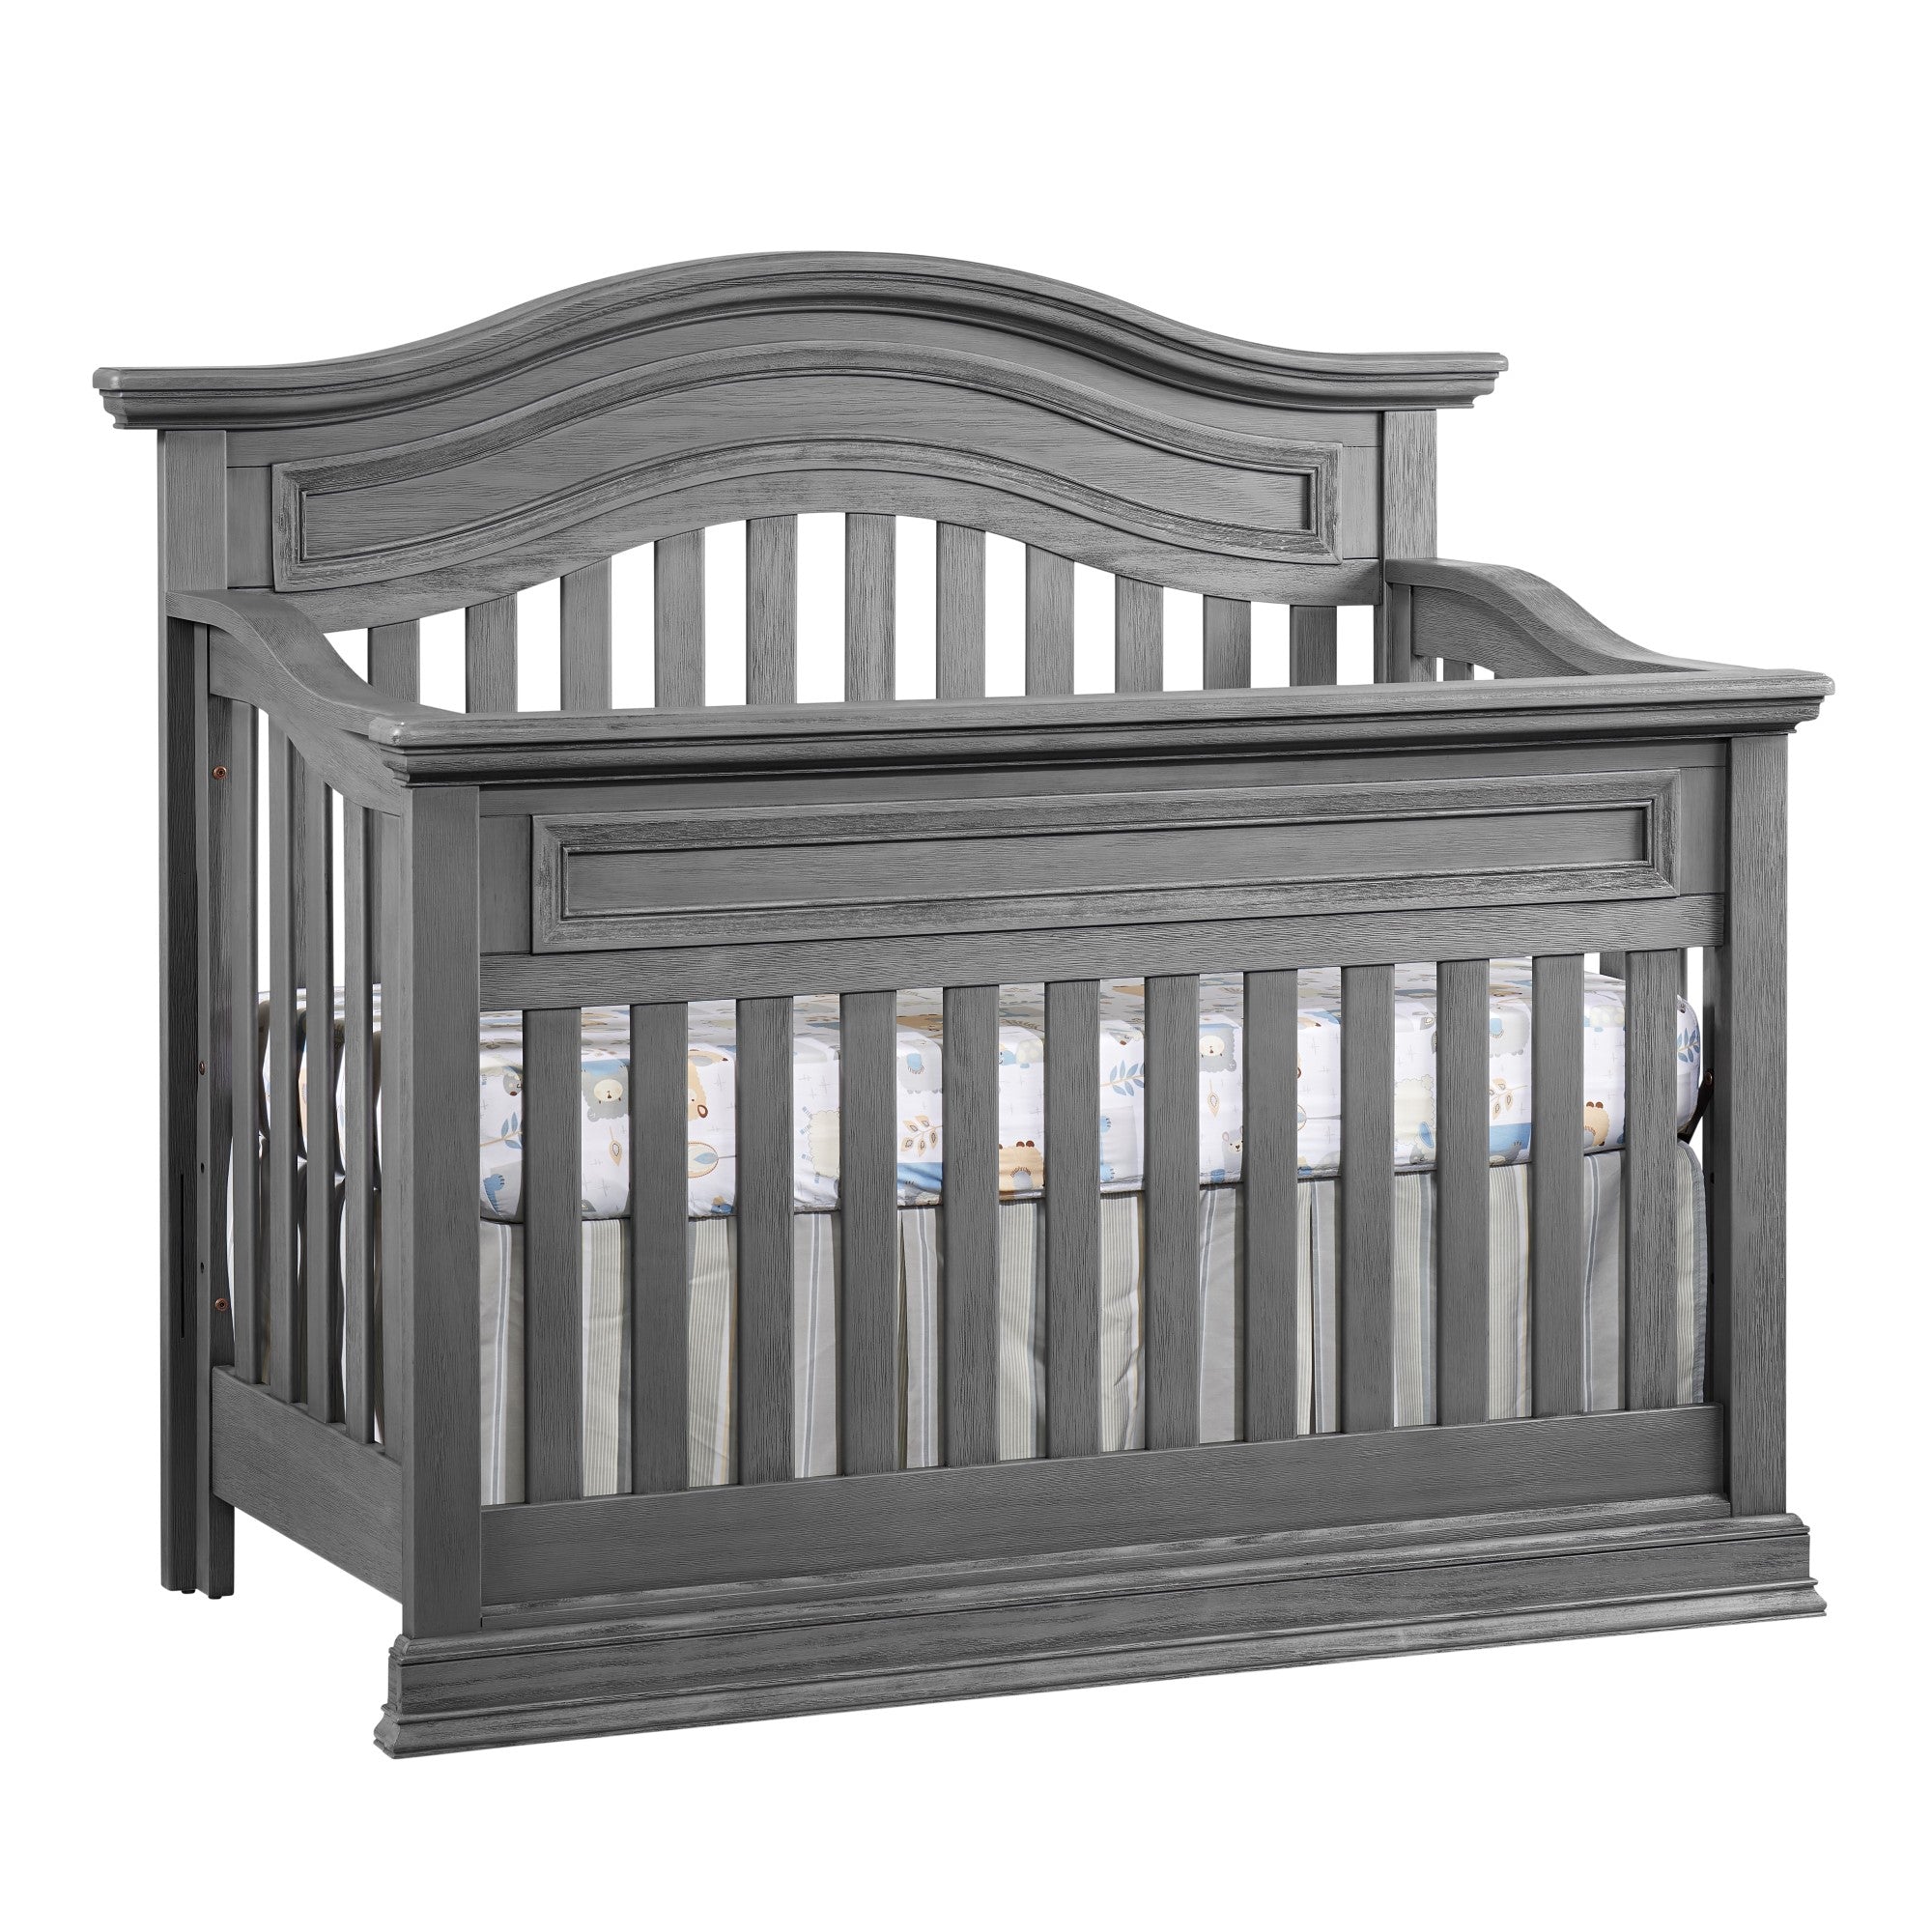 Oxford Baby Glenbrook 4 in 1 Convertible Crib